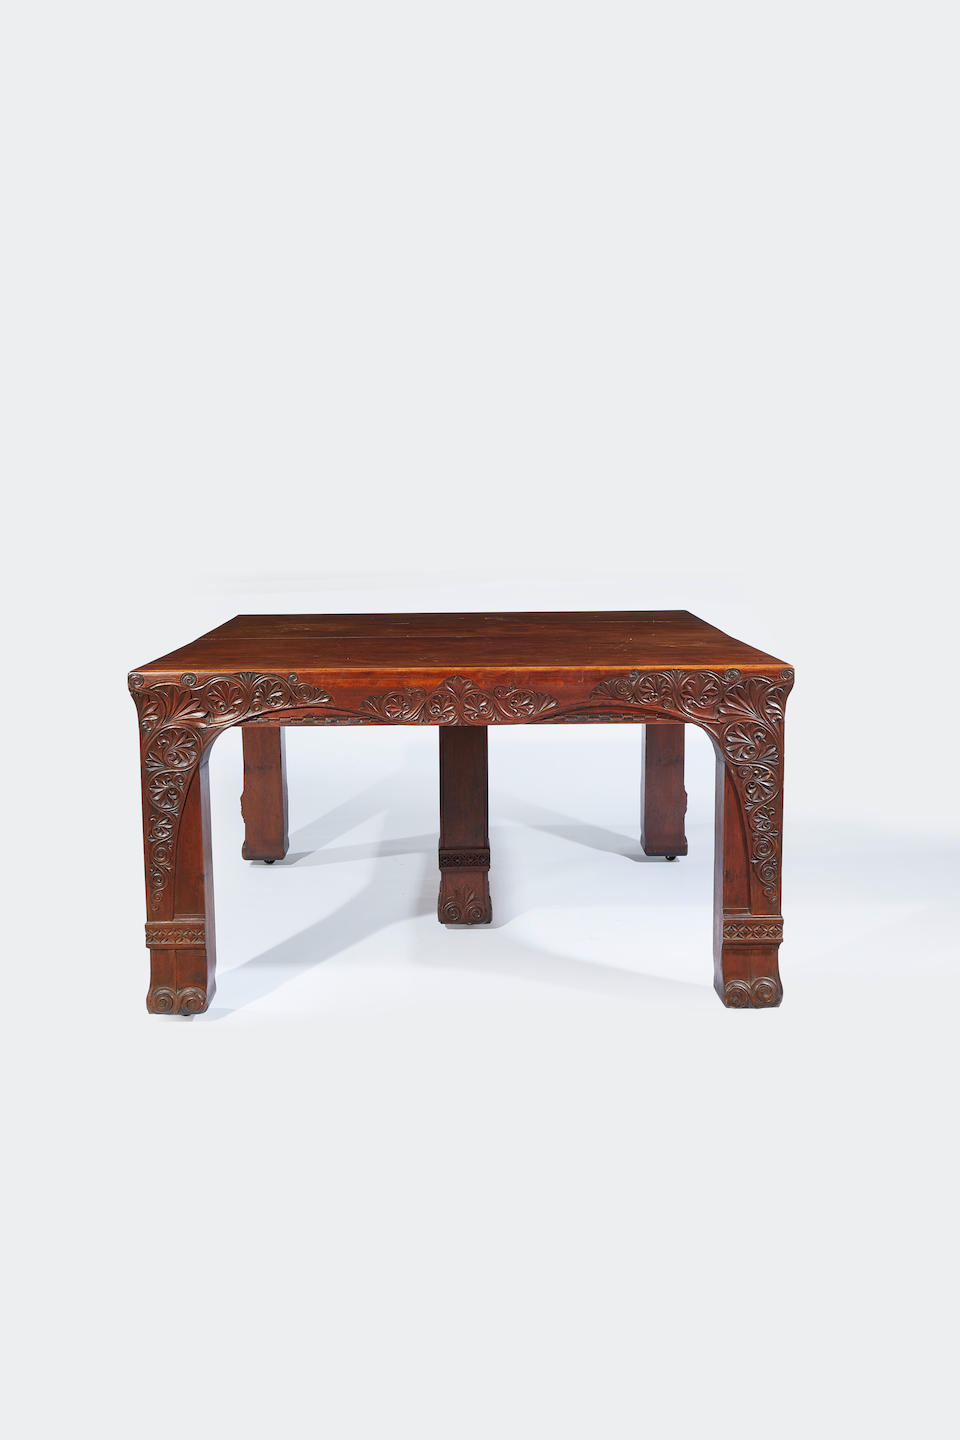 Isaac Scott (1845-1920) Dining table1894carved walnut, signed "Isaac Scott" and dated 1894 to one leg, with four additional leavesheight 30 1/2in; width 121in (extended); depth 54in